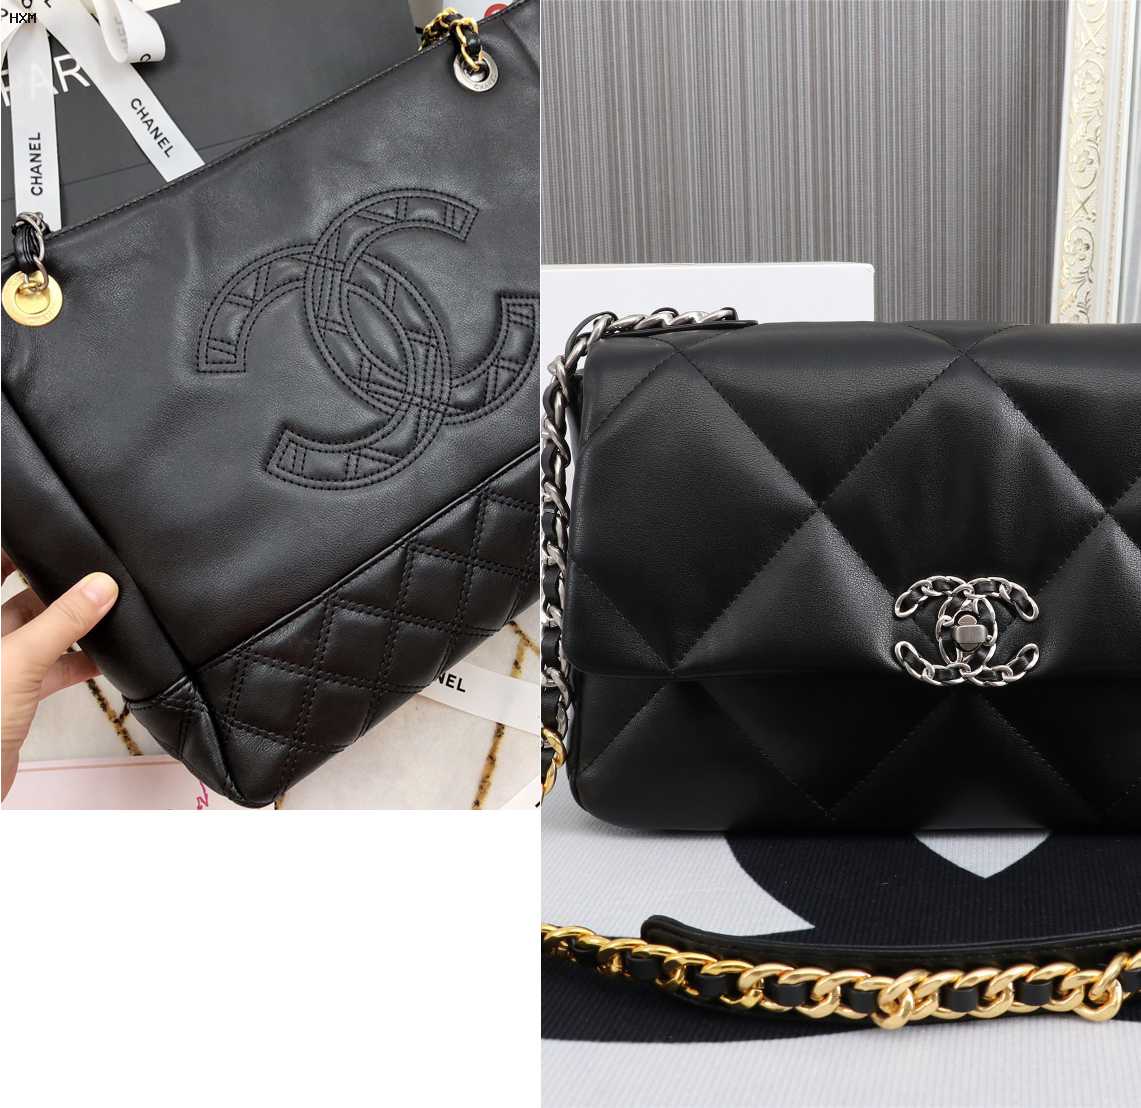 sac chanel strass argent